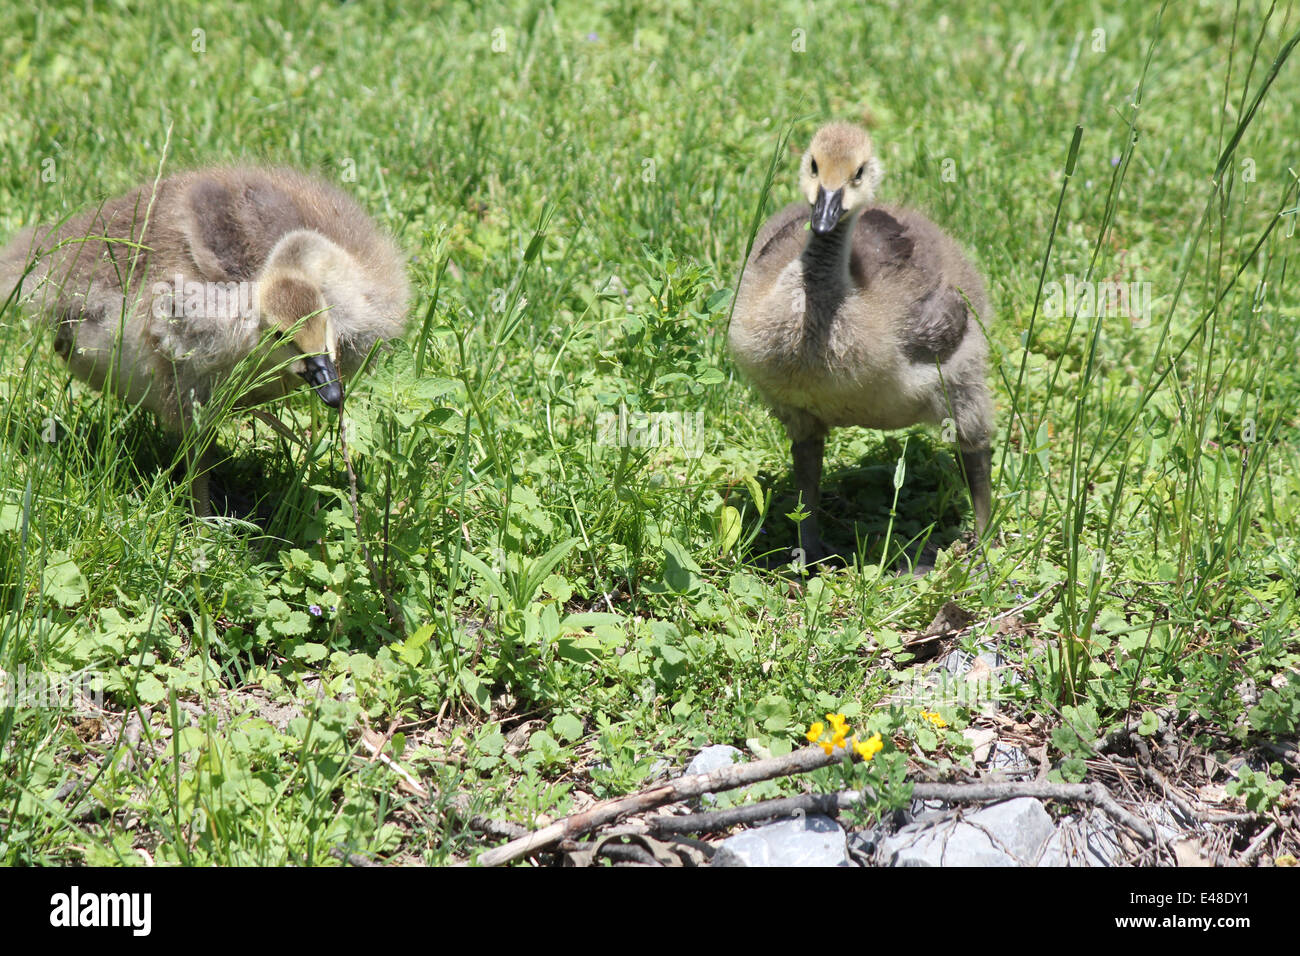 Fuzzy little gosling's (Canada Geese) about 1 month old in the grass foraging for food Stock Photo